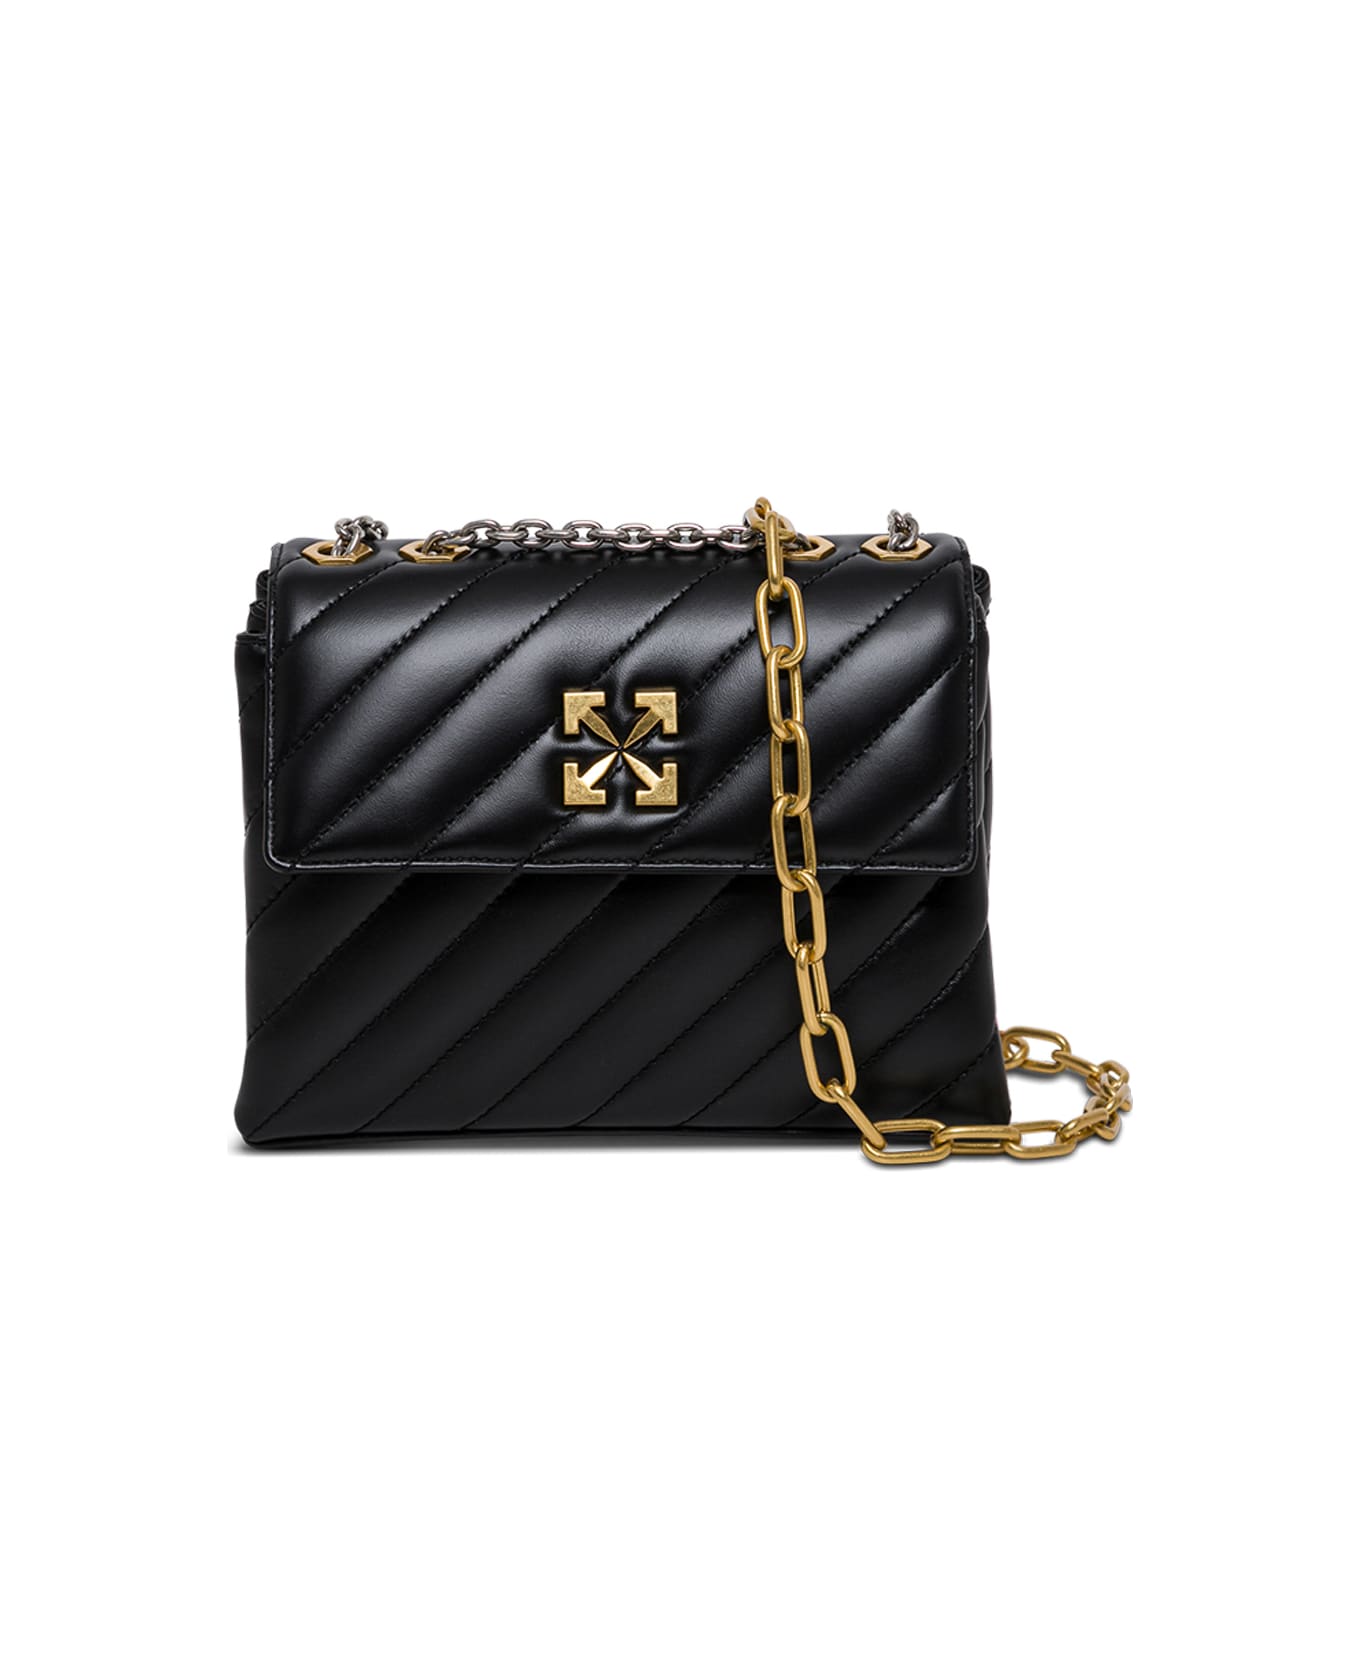 Off-White Jackhammer 24 Quilted Leather Crossbody Bag - Nero